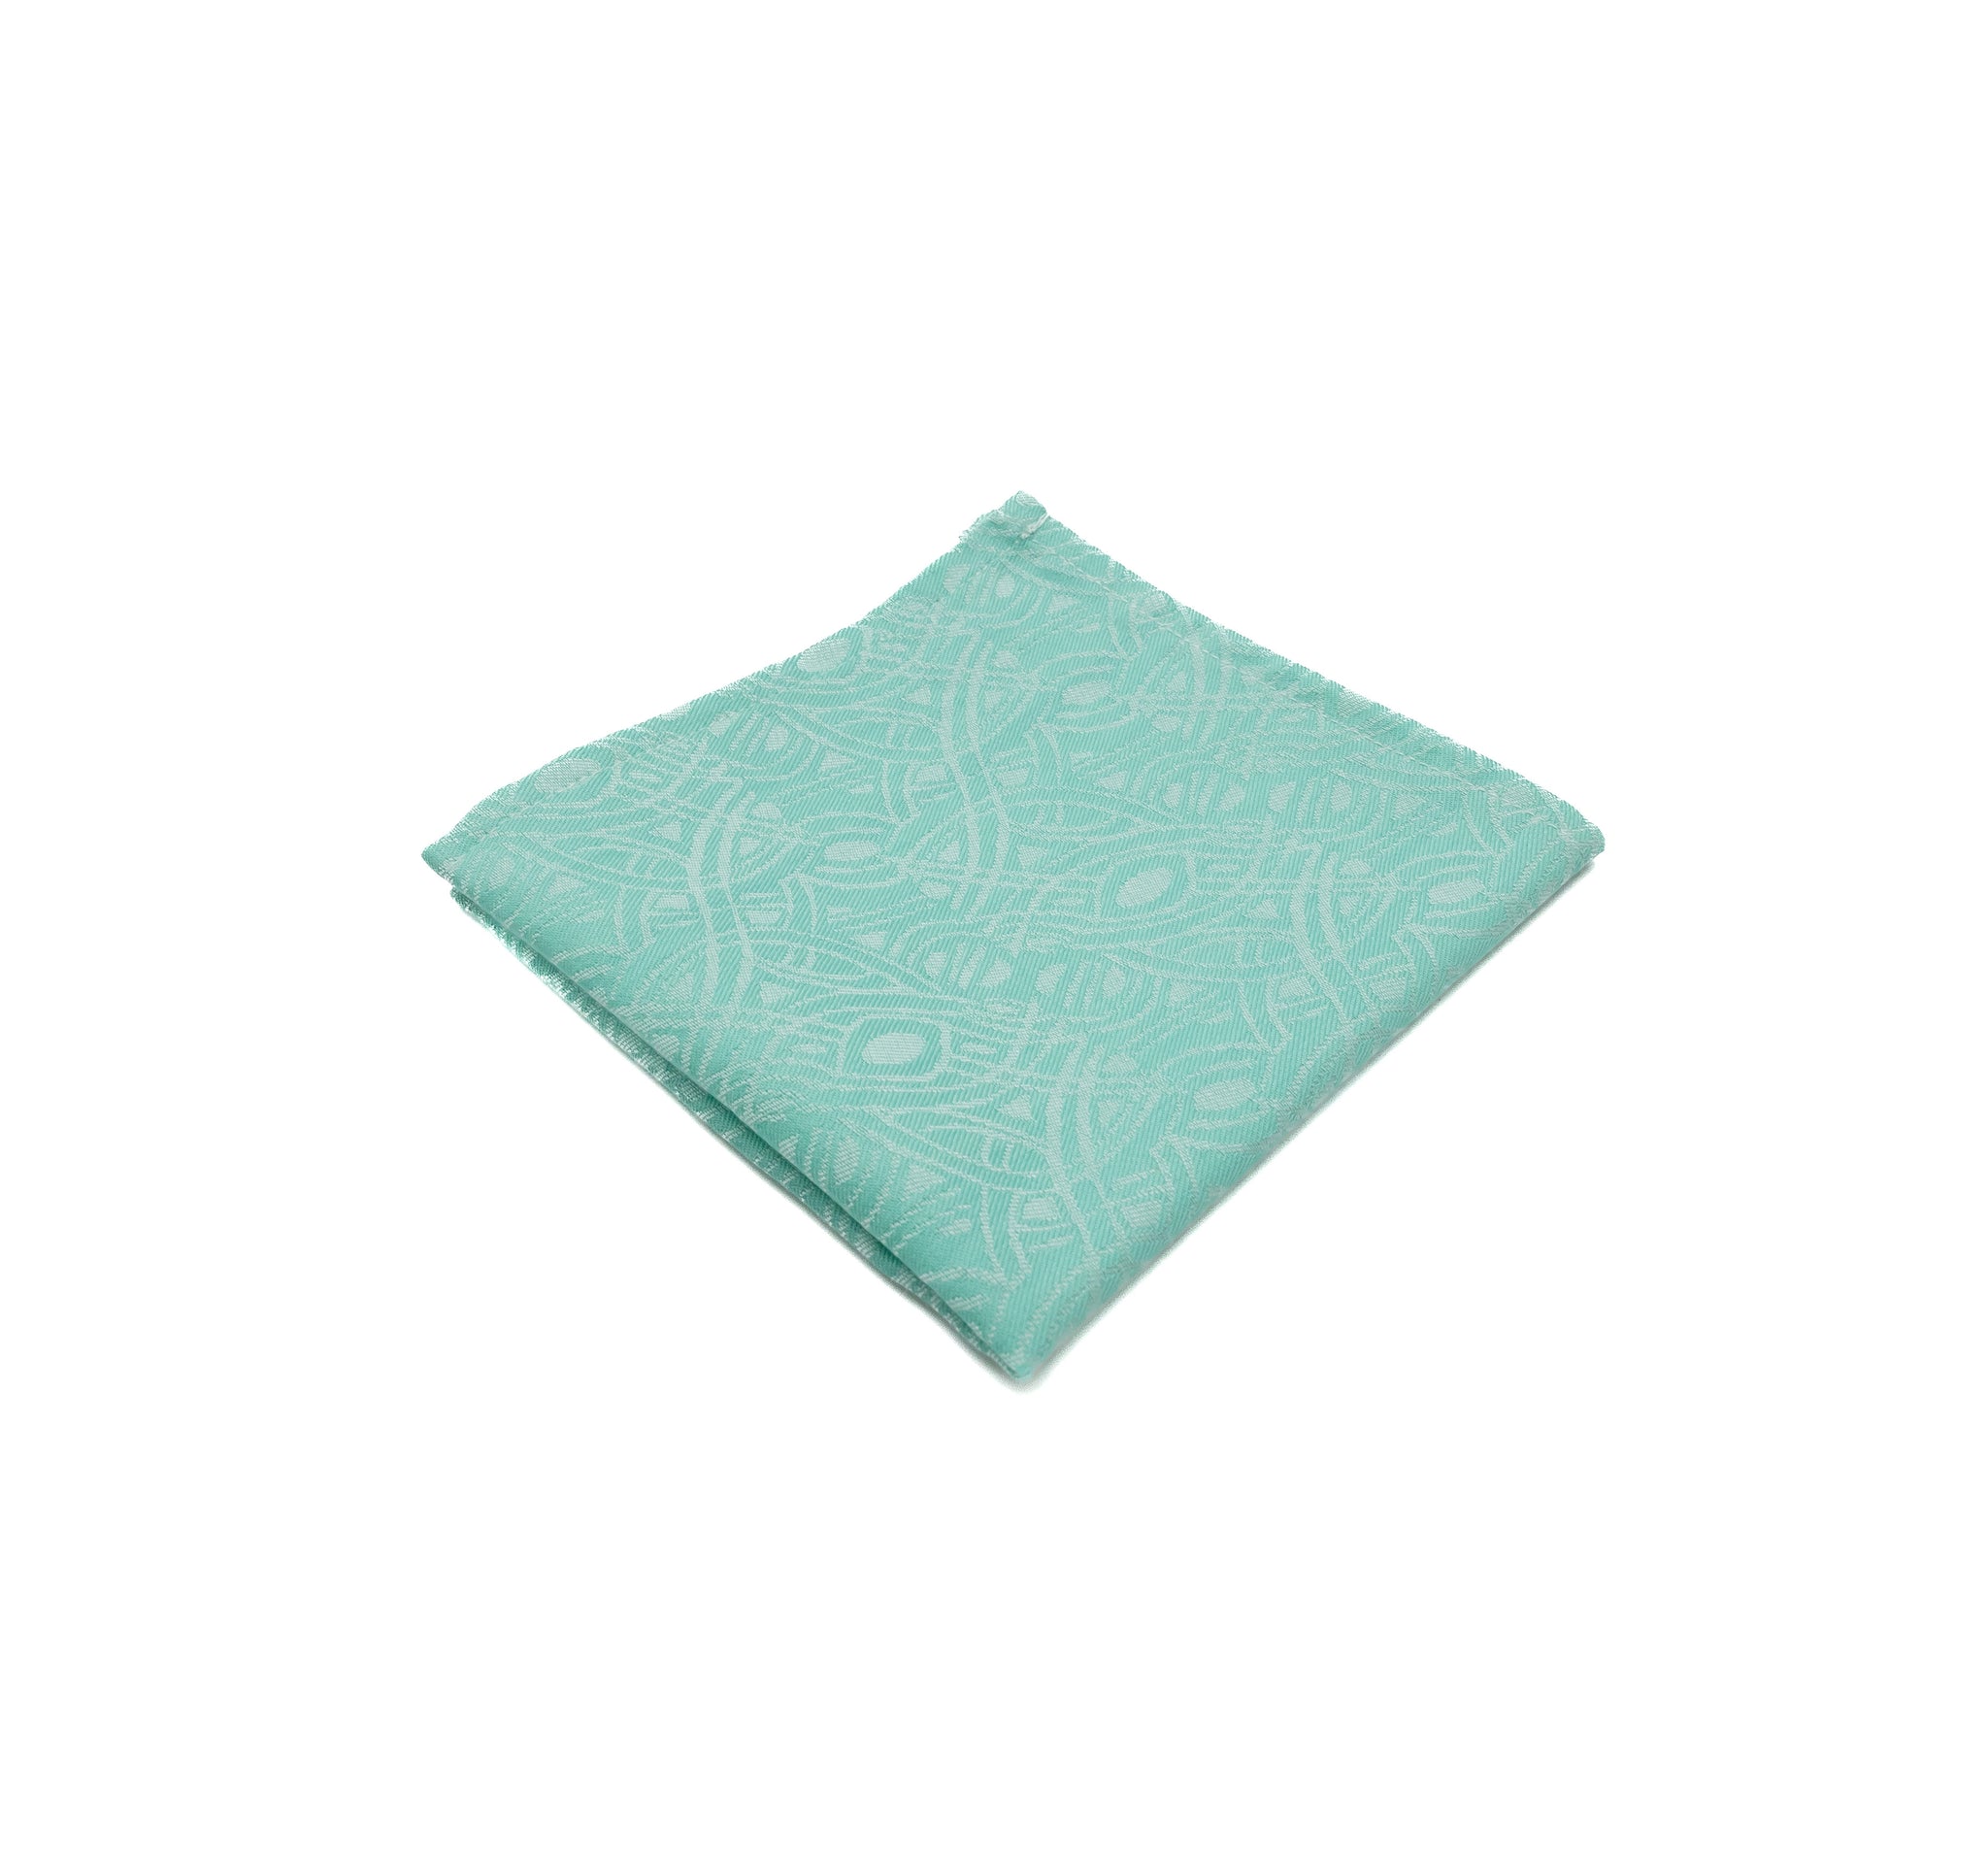 Teal; Overpass pattern pocket square in charcoal